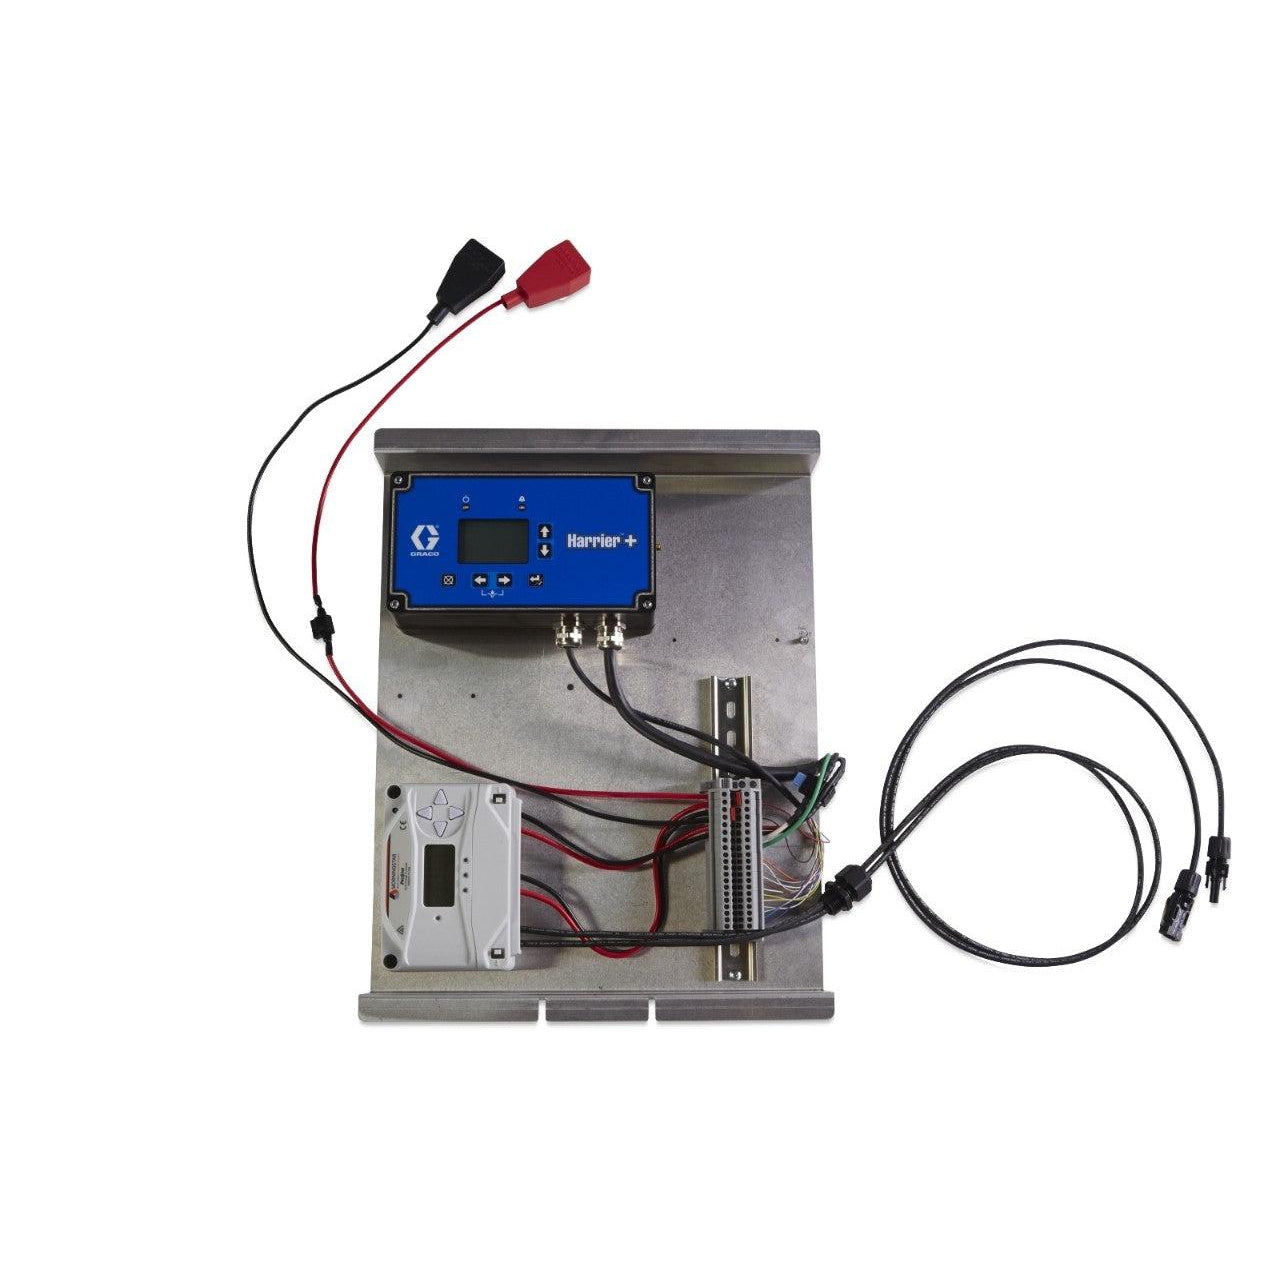 Four-Battery Control Box with Harrier+ International Controller and Includes ASC 24/16 One Panel Charge Controller